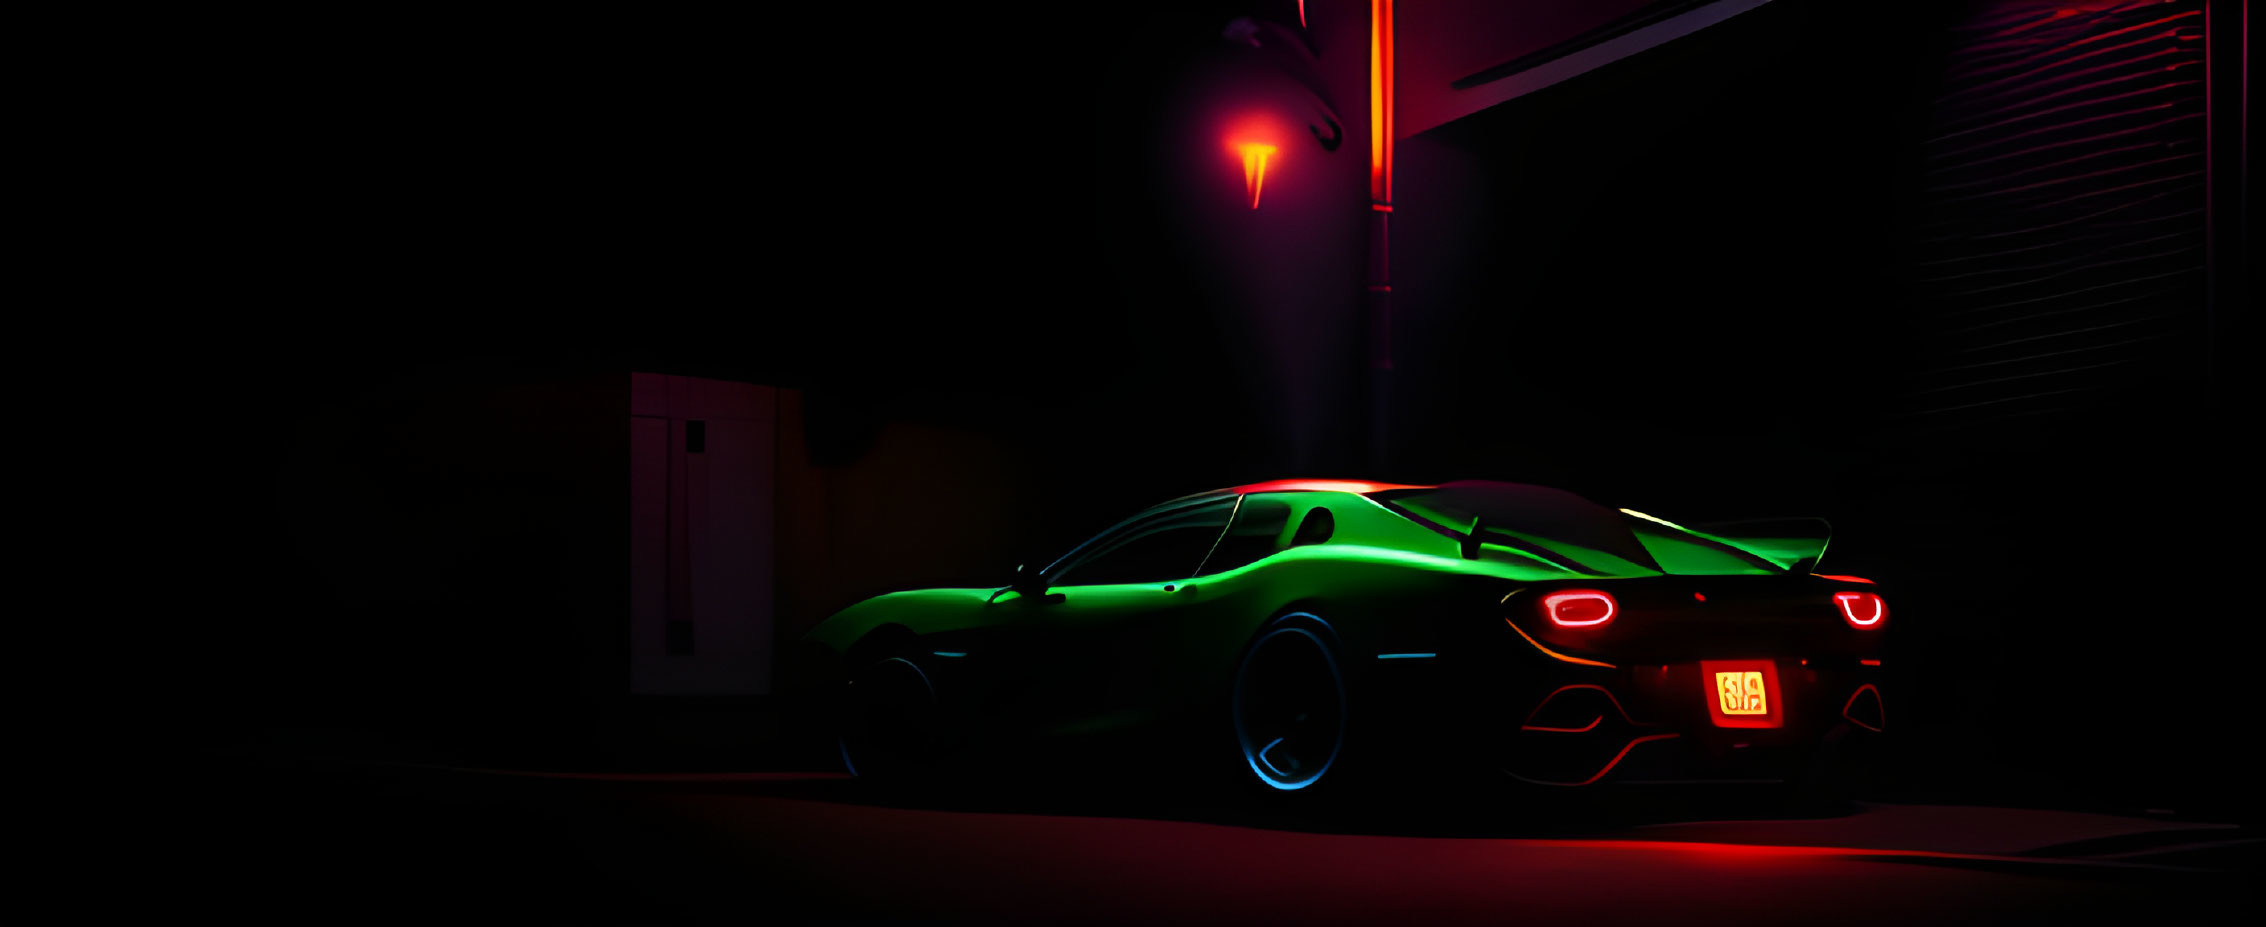 Neon-lit green sports car parked at night beside a building under red stoplight